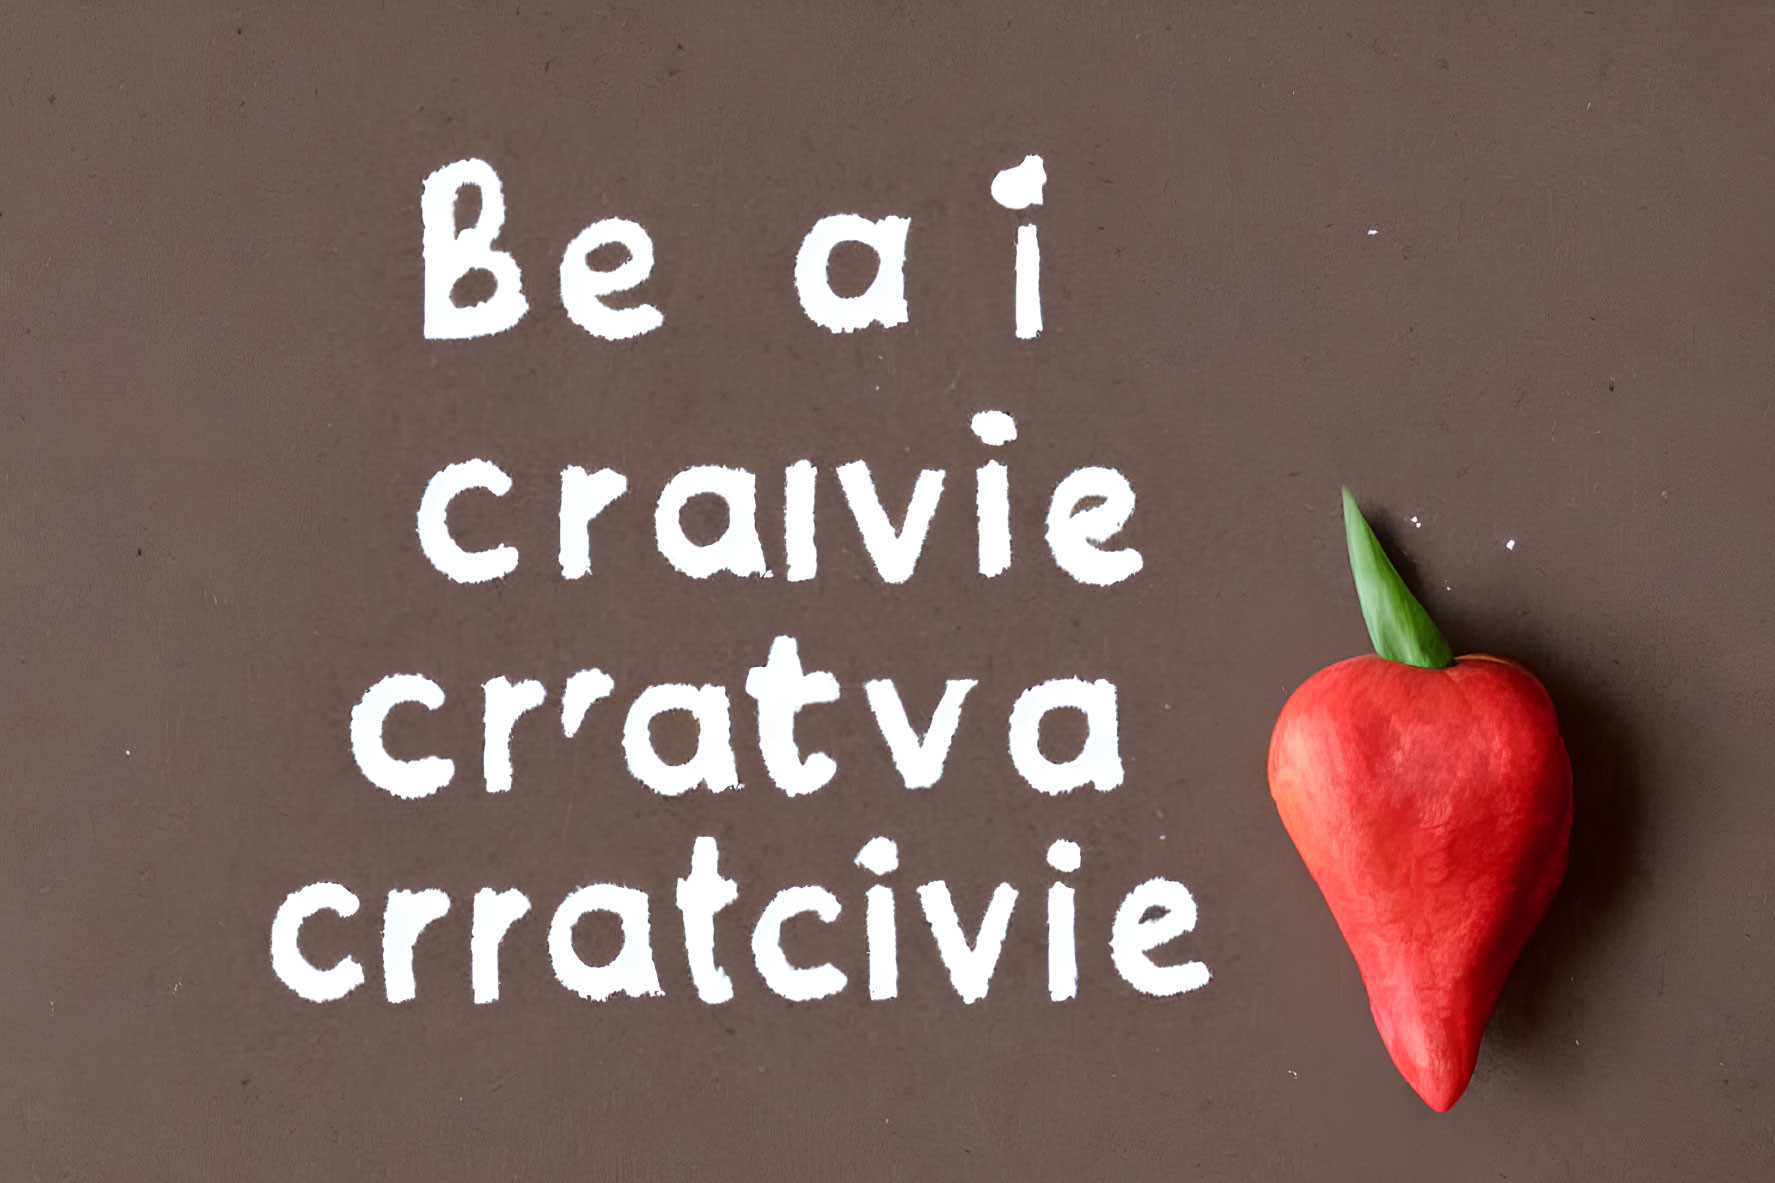 Misspelled text "Be ai crave craive crativa cratcive" with white background